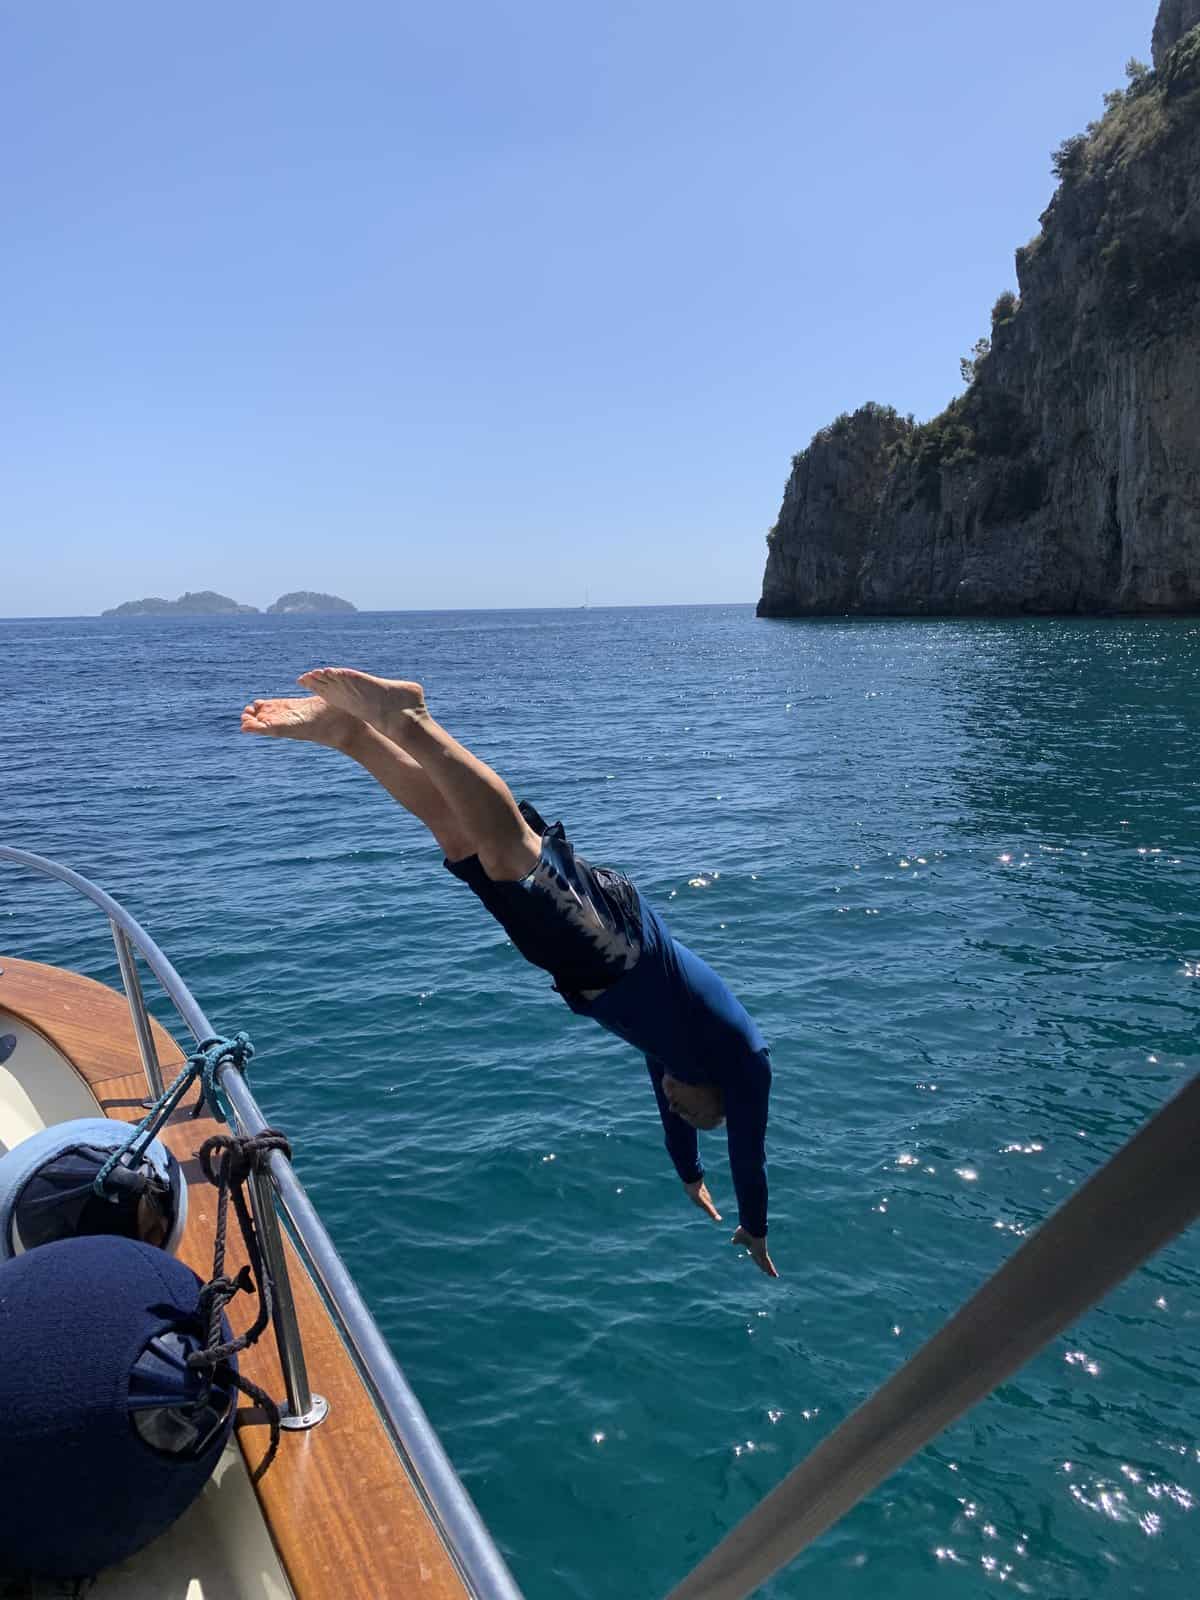 Dave jumping off the boat into the sea